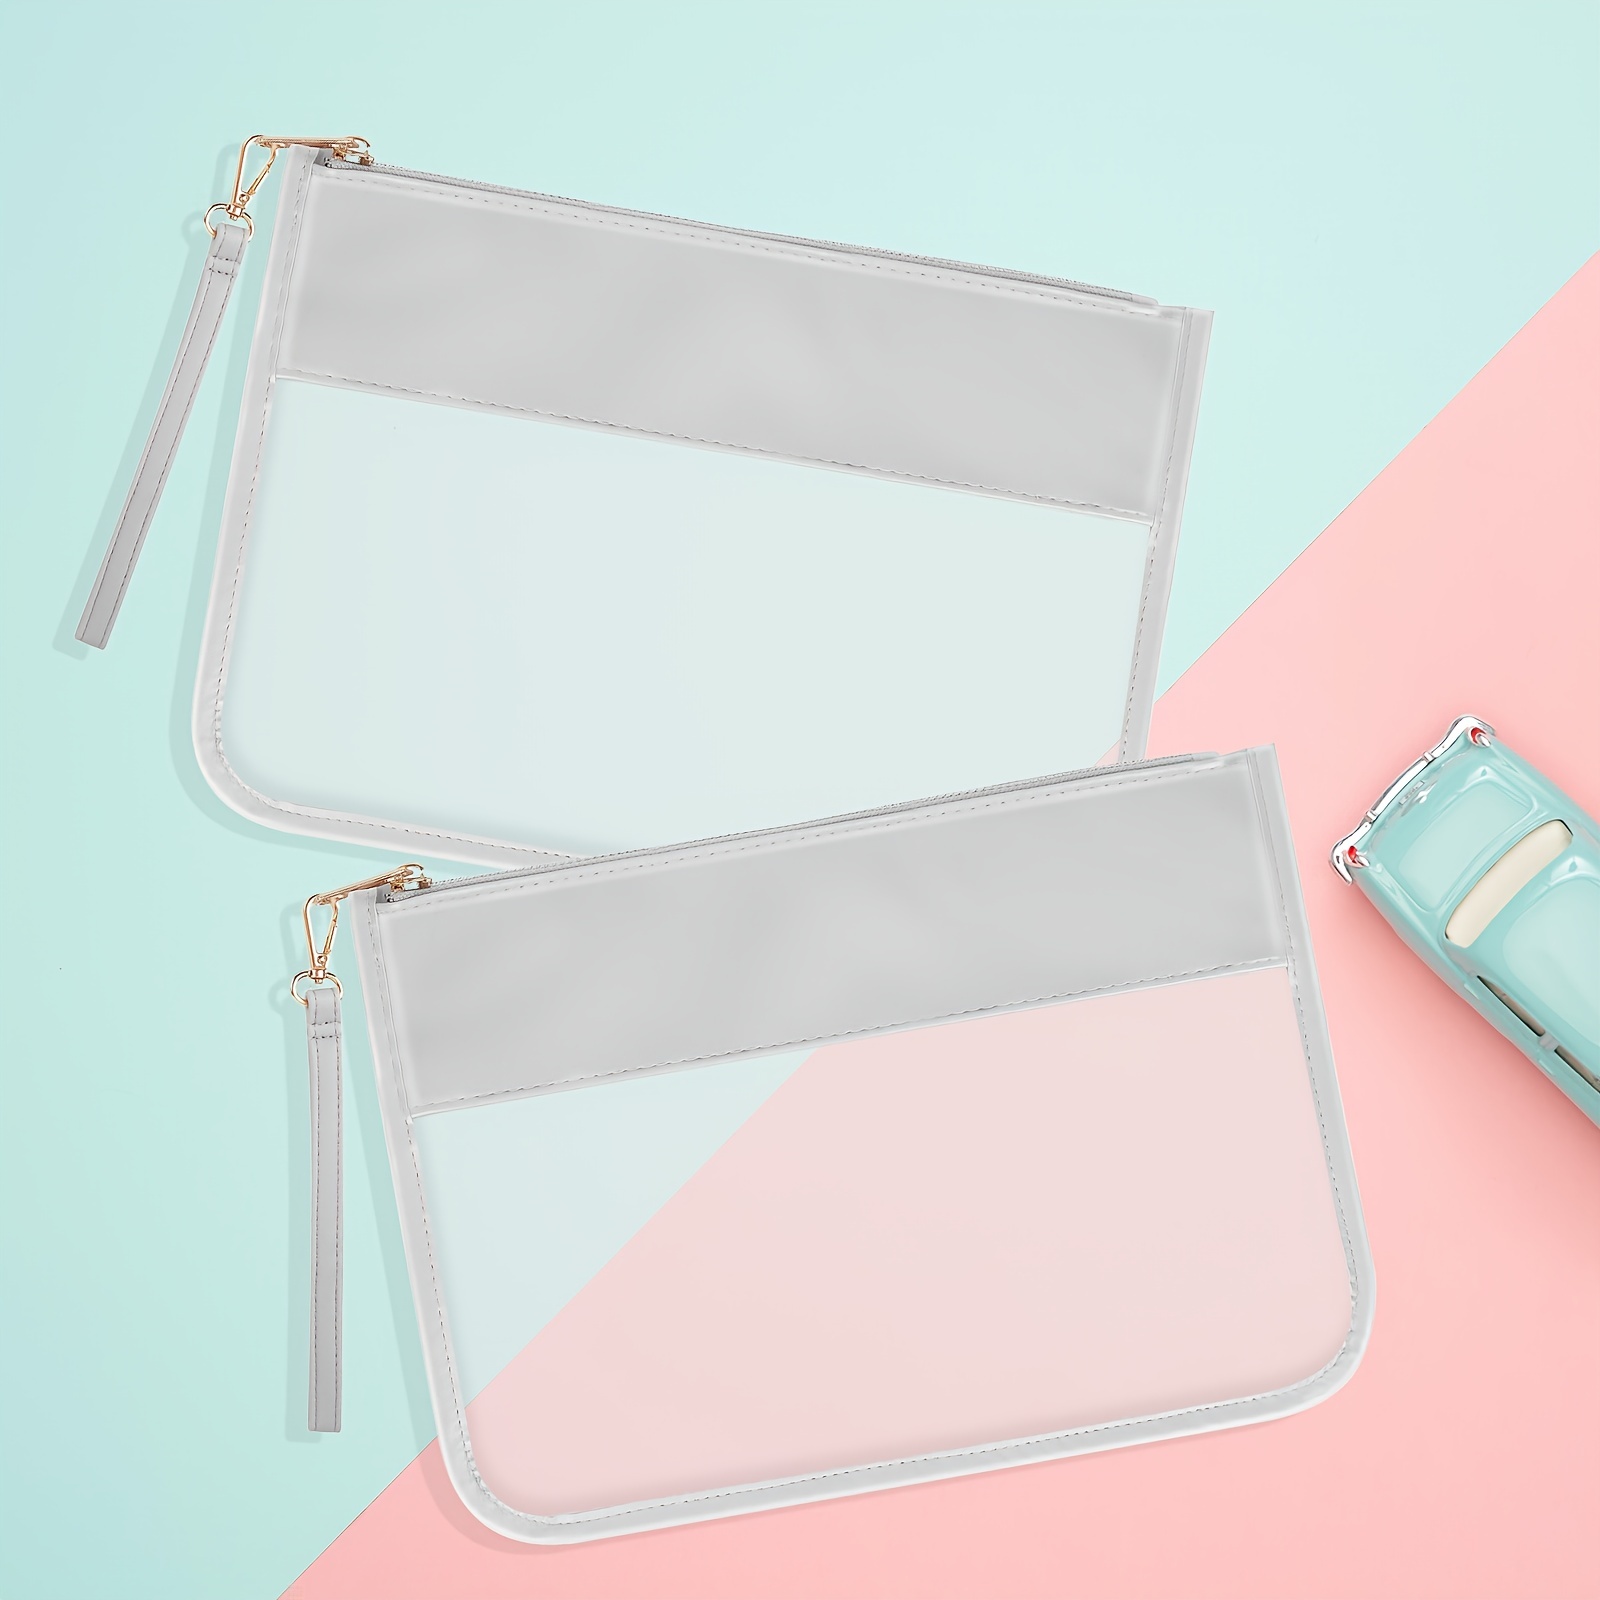  2Pcs Clear Zipper Pouches - Travel Toiletry Bag Makeup  Organizer Cosmetic Bags for Women Clear Toiletry Bag Small Makeup Pouch  Plastic Zipper Bags Zipper Pouch - Girls Travel Toiletry Bag Pencil